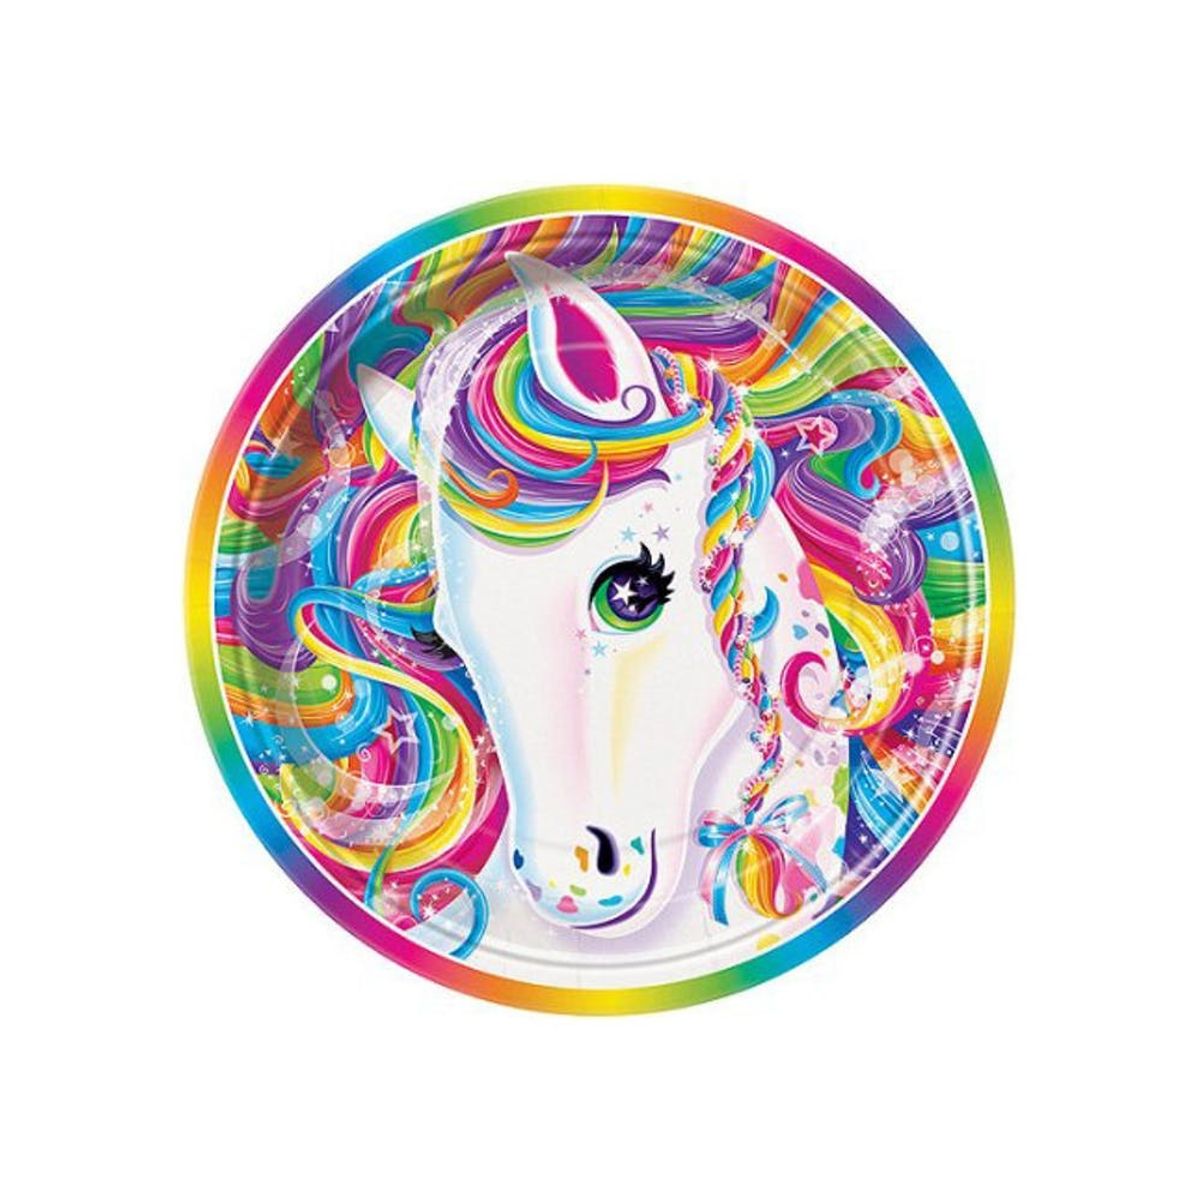 Lisa Frank’s New Line of Party Supplies Are Serious ’90s Kid #PartyGoals